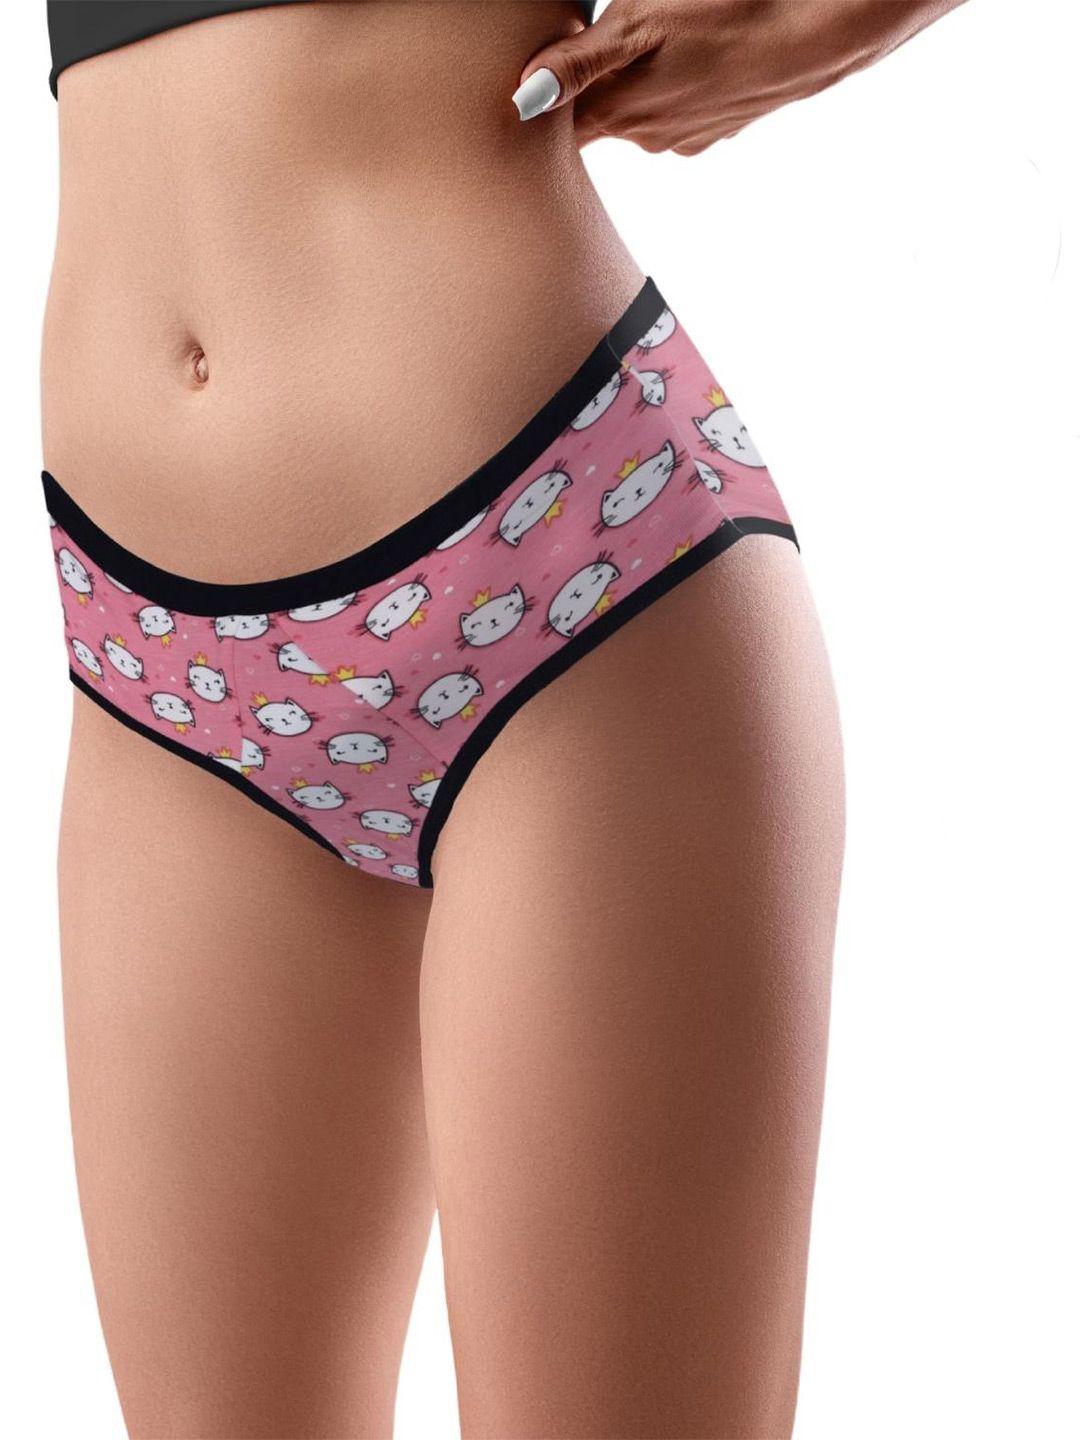 dchica-graphic-printed-cotton-reusable-period-panty